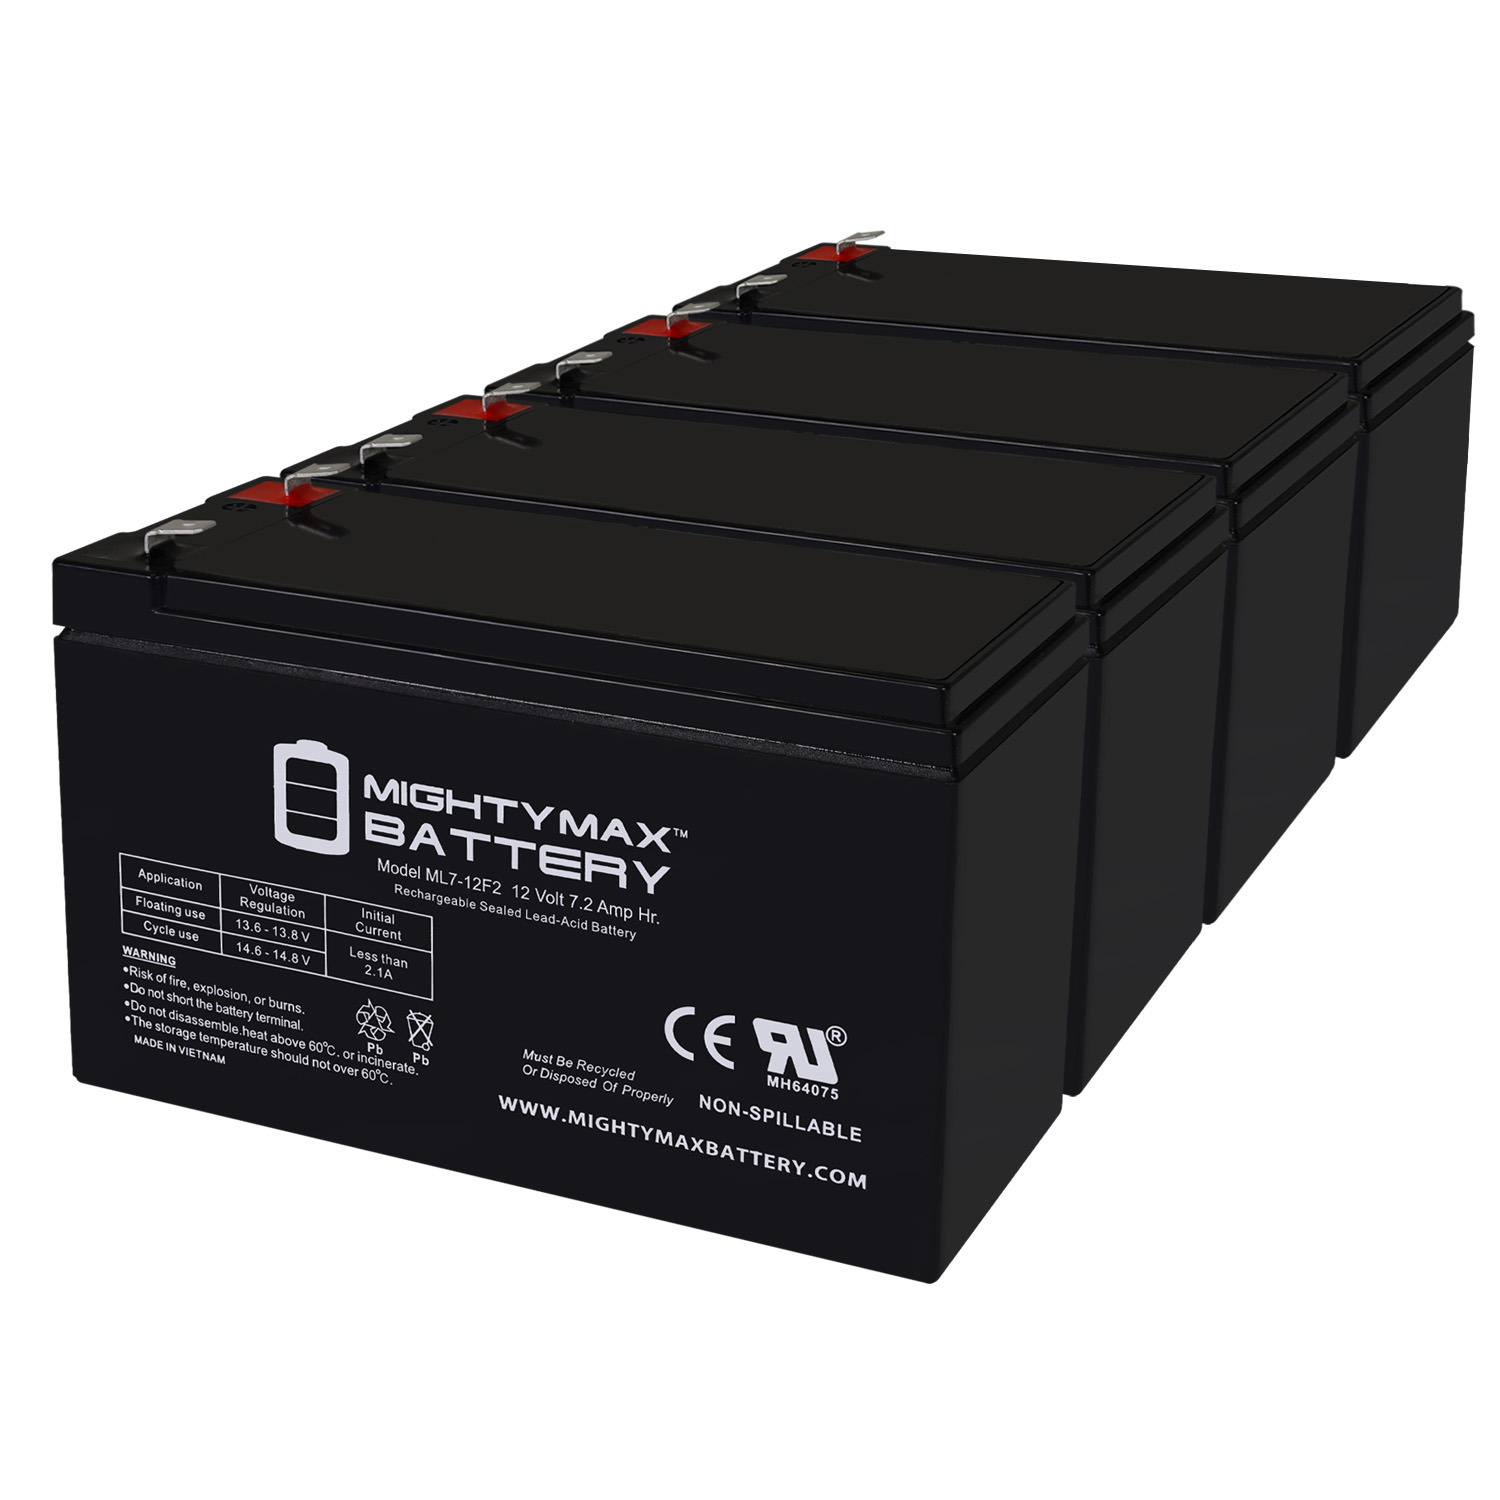 12V 7Ah F2 Battery Replaces Enersys Genesis 150 Scooter Moped GY6 - 4 Pack